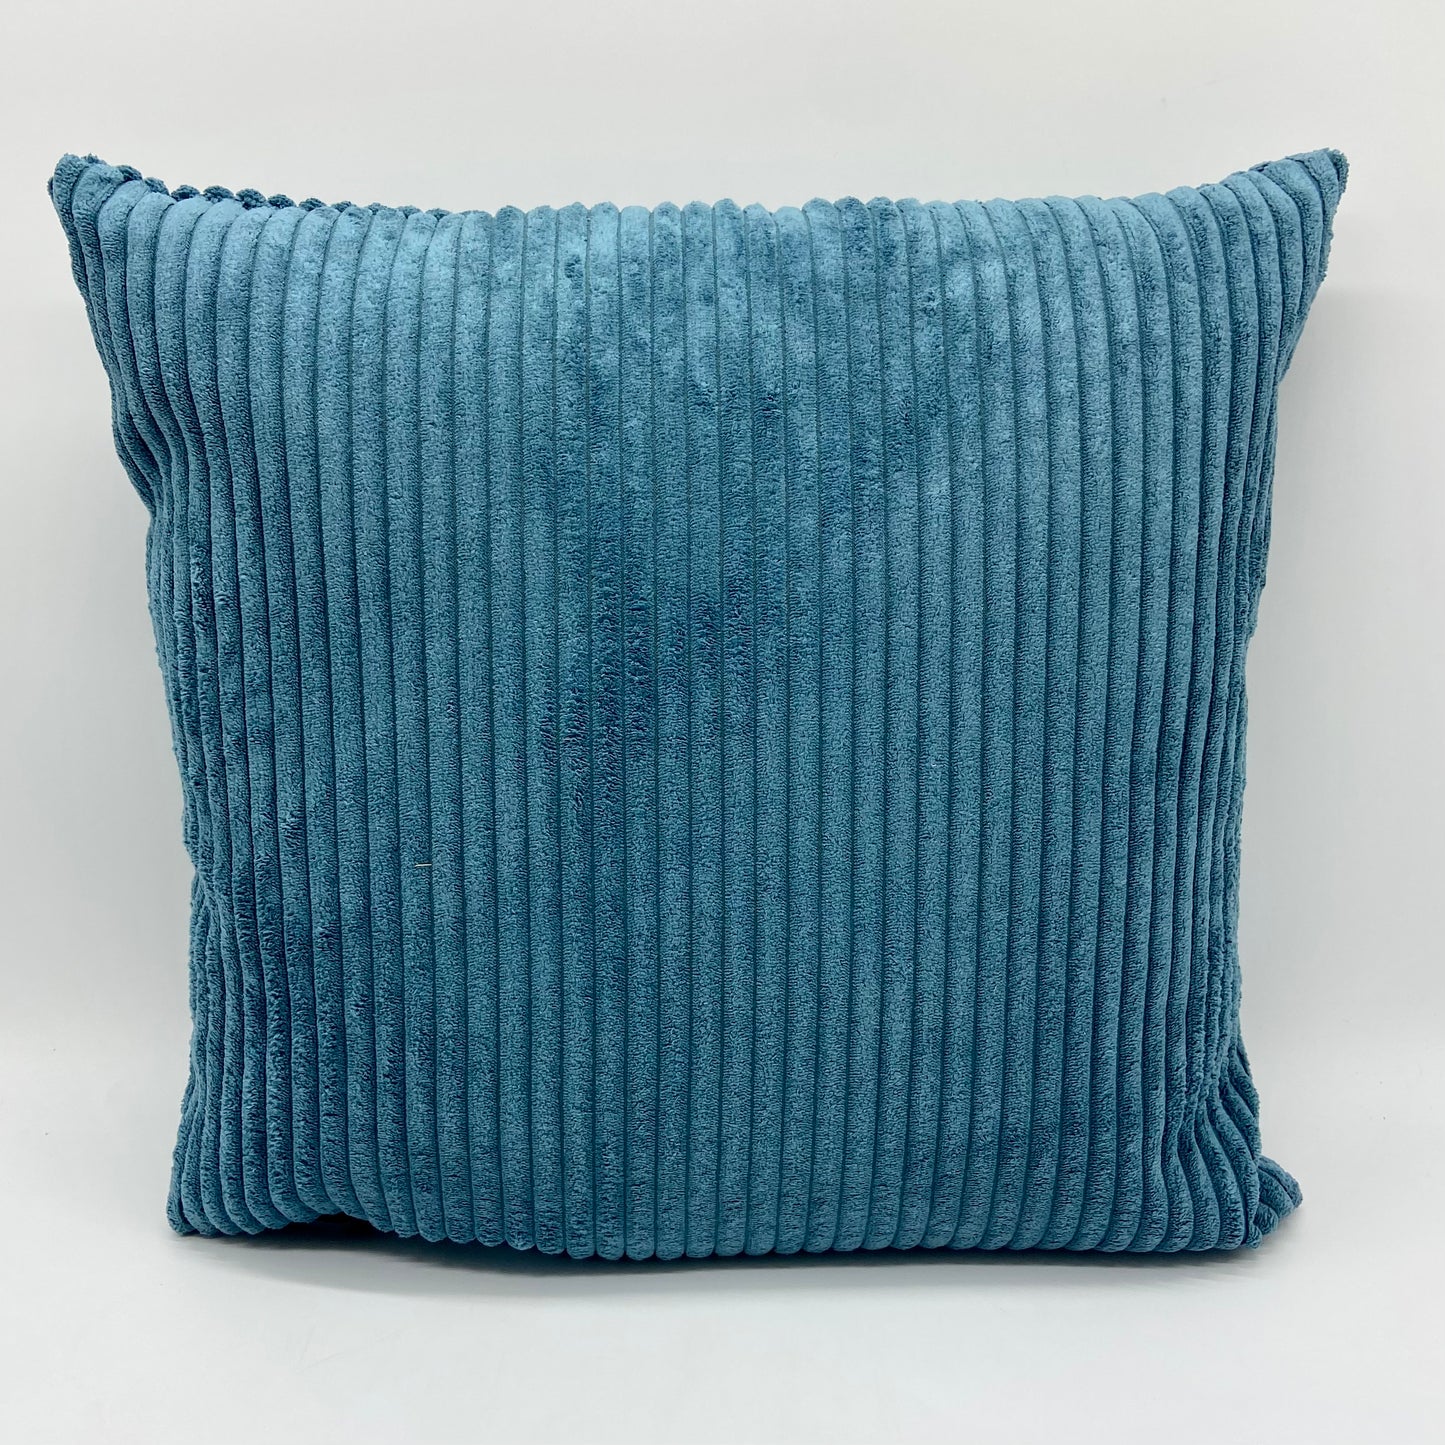 The vintage collection - Velvet cushions